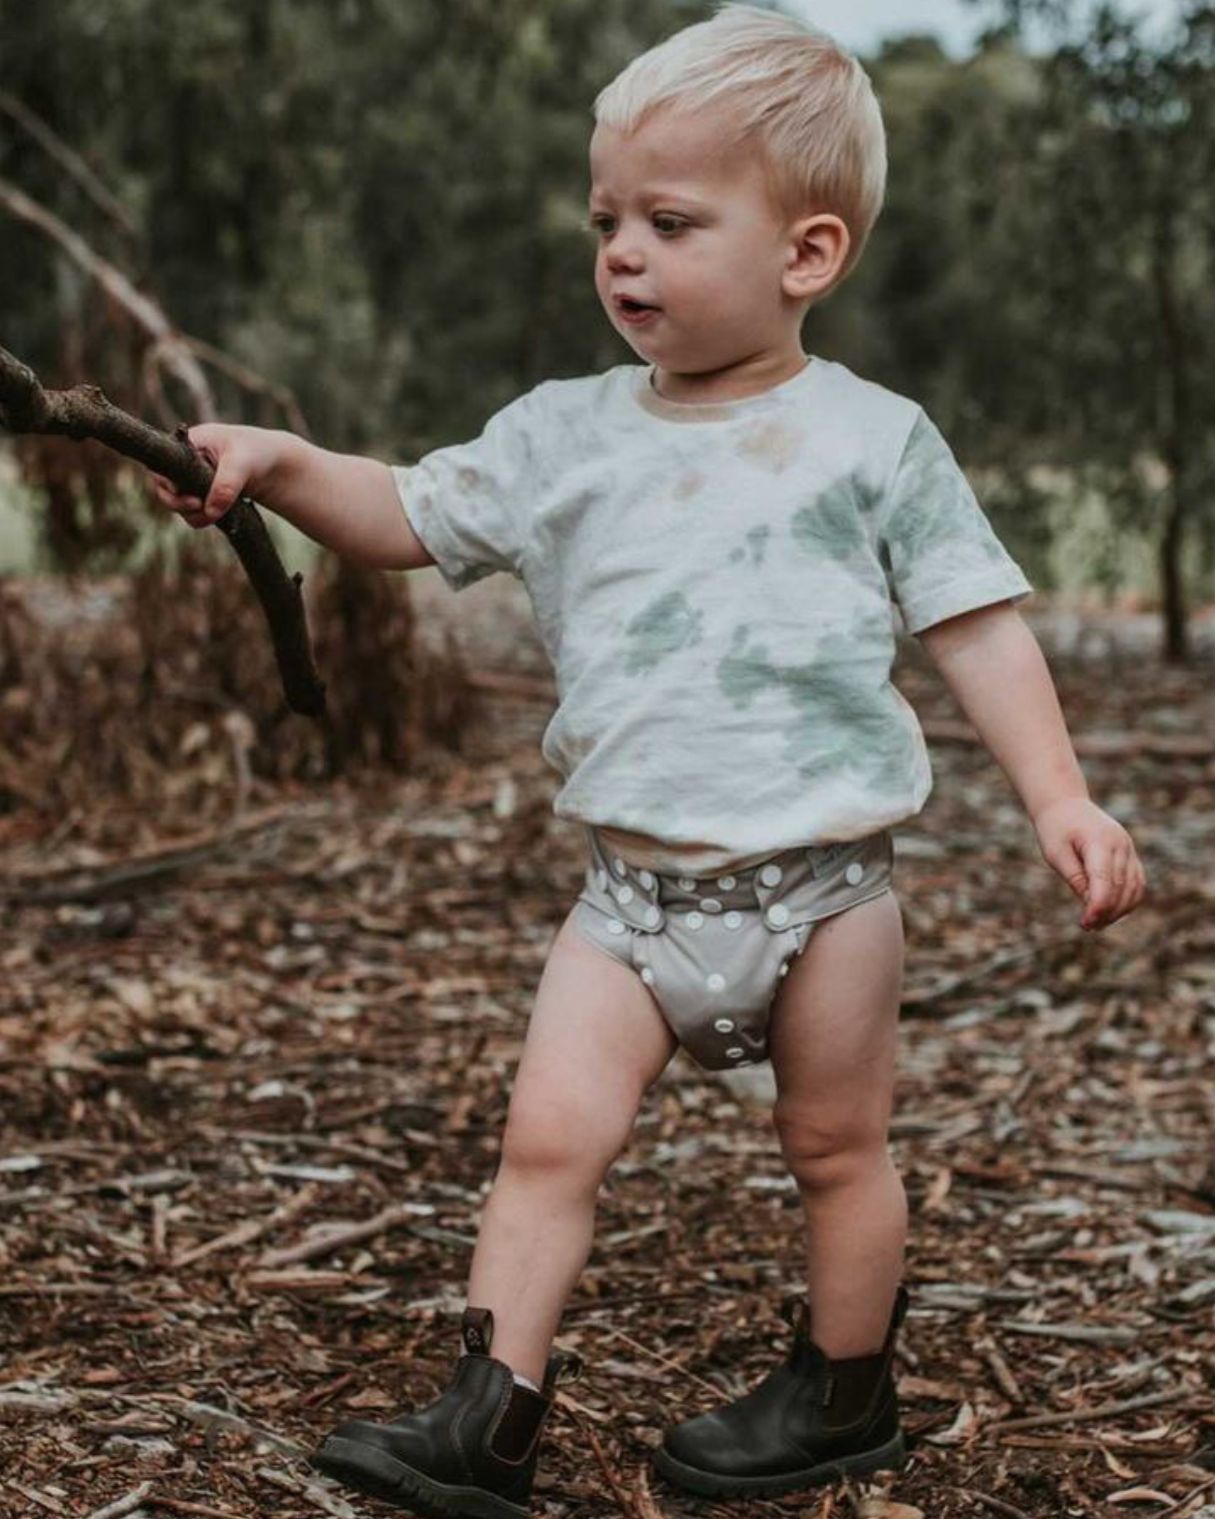 Toddler walks through the sticks wearing a tan modern cloth nappy holding a stick in the air